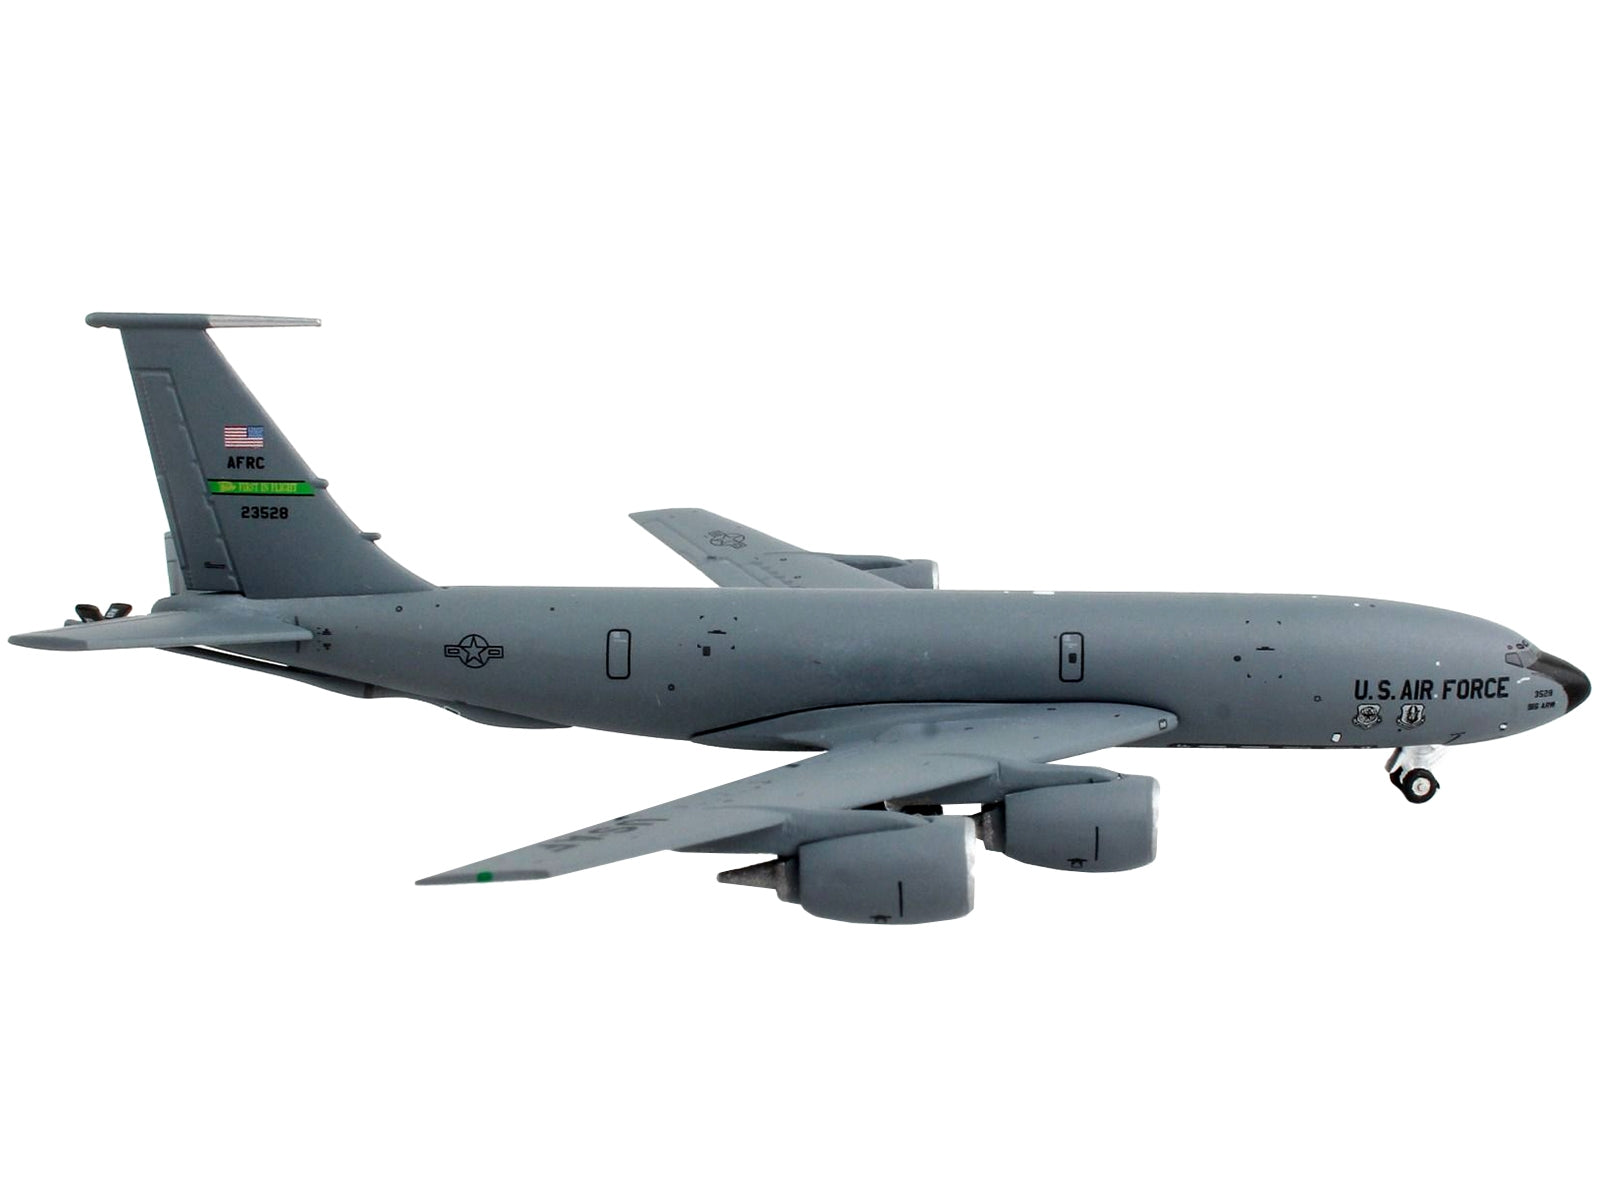 Boeing KC-135R Stratotanker Tanker Aircraft "Seymour Johnson AFB" United States Air Force